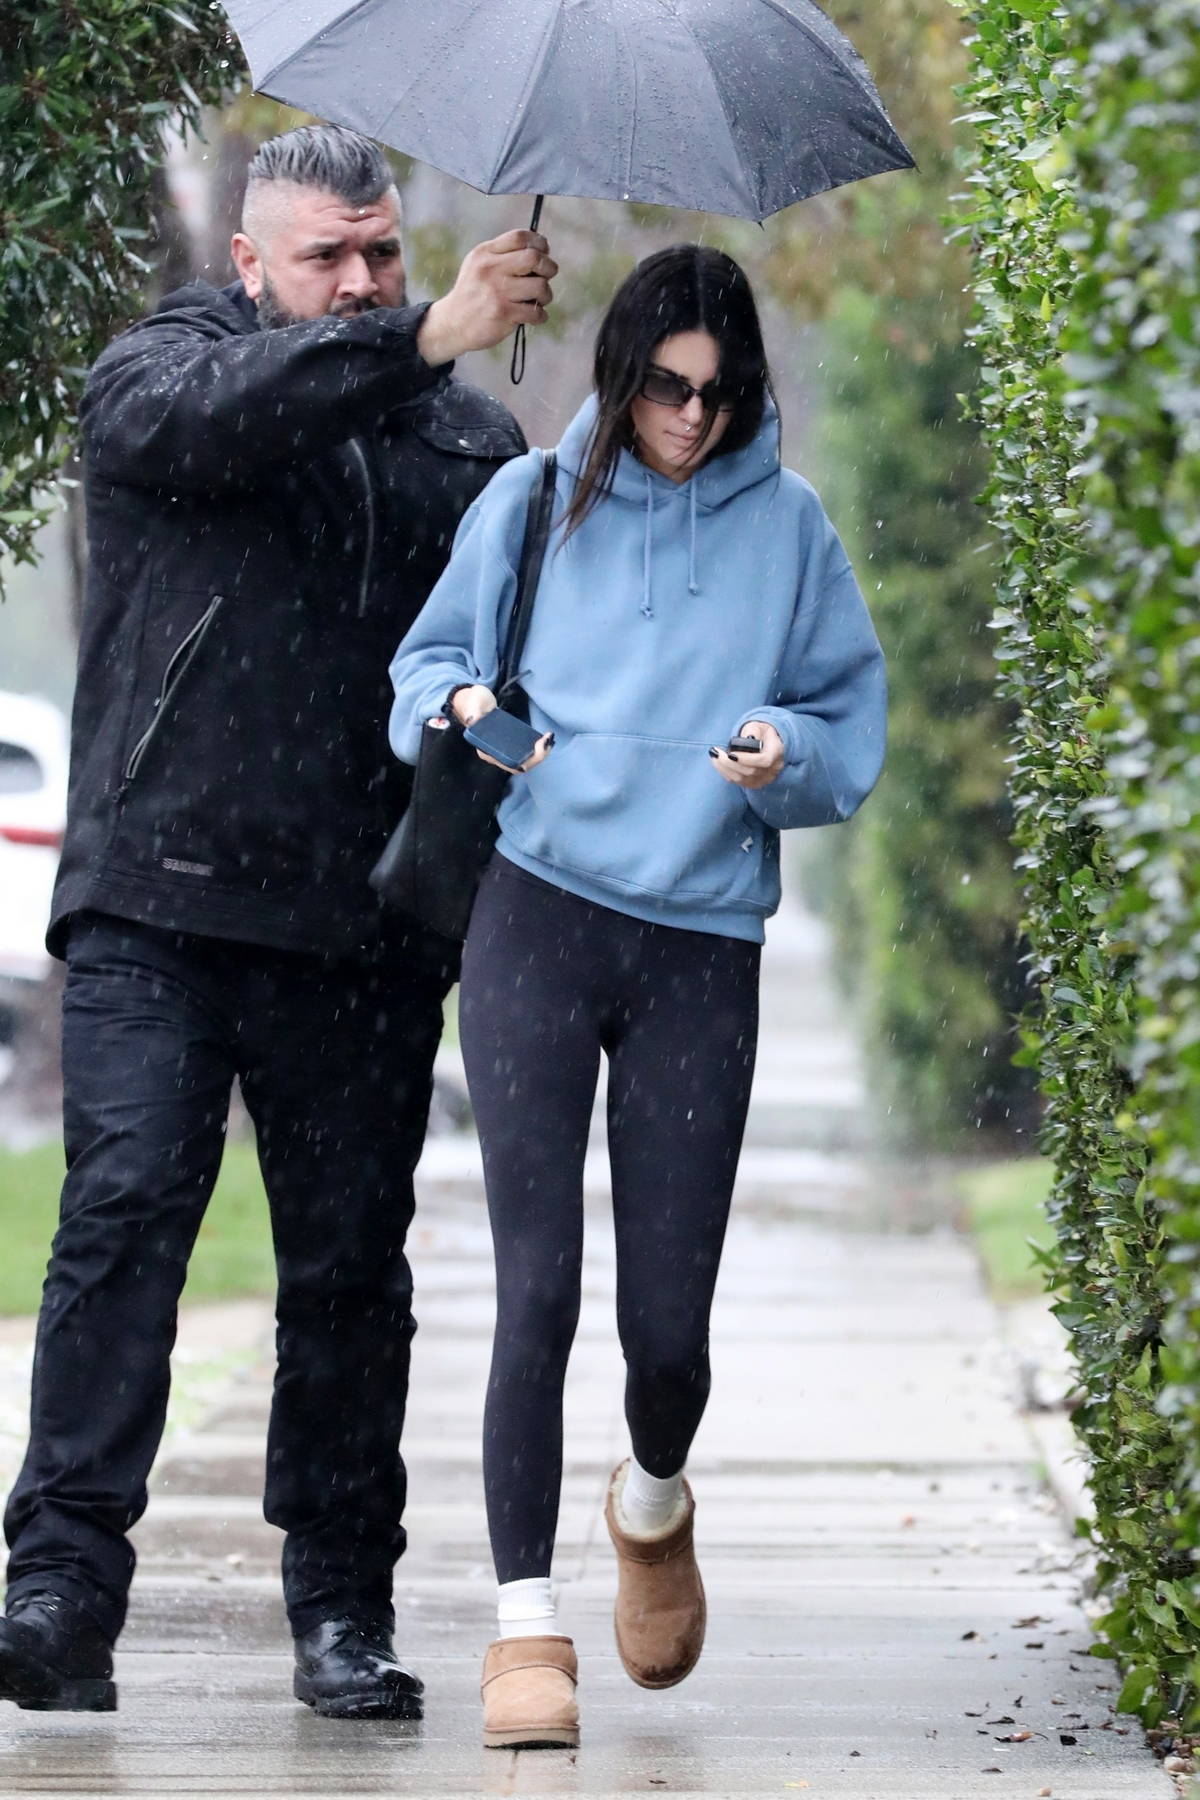 https://www.celebsfirst.com/wp-content/uploads/2023/01/kendall-jenner-sports-a-hoodie-and-leggings-as-she-braves-the-rain-while-running-a-few-errands-in-beverly-hills-california-140123_16.jpg